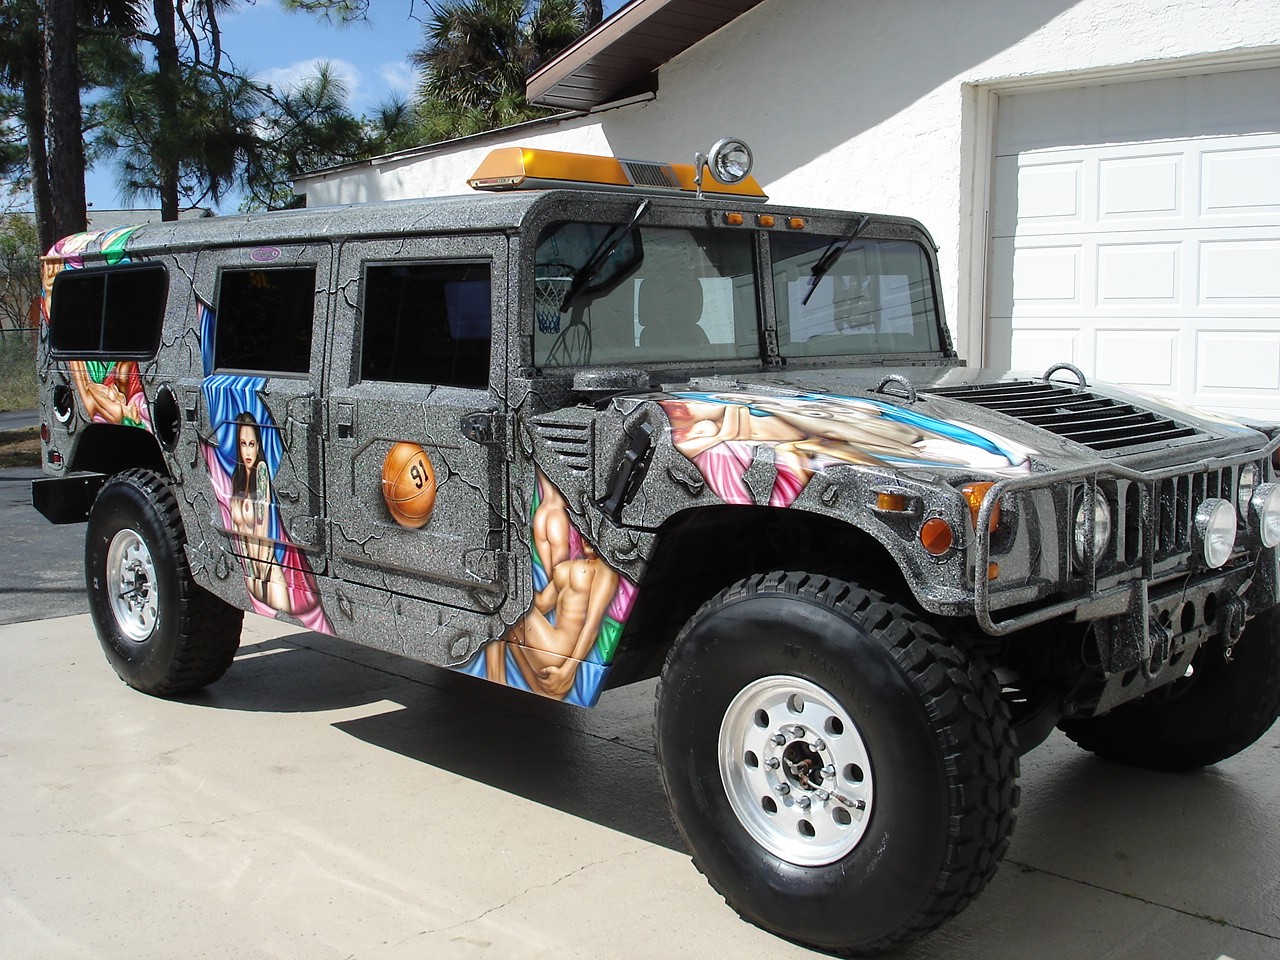 Dennis Rodman’s Hummer H1 Is Up For Sale, But Will Kim Jong-un Buy it? - autoevolution